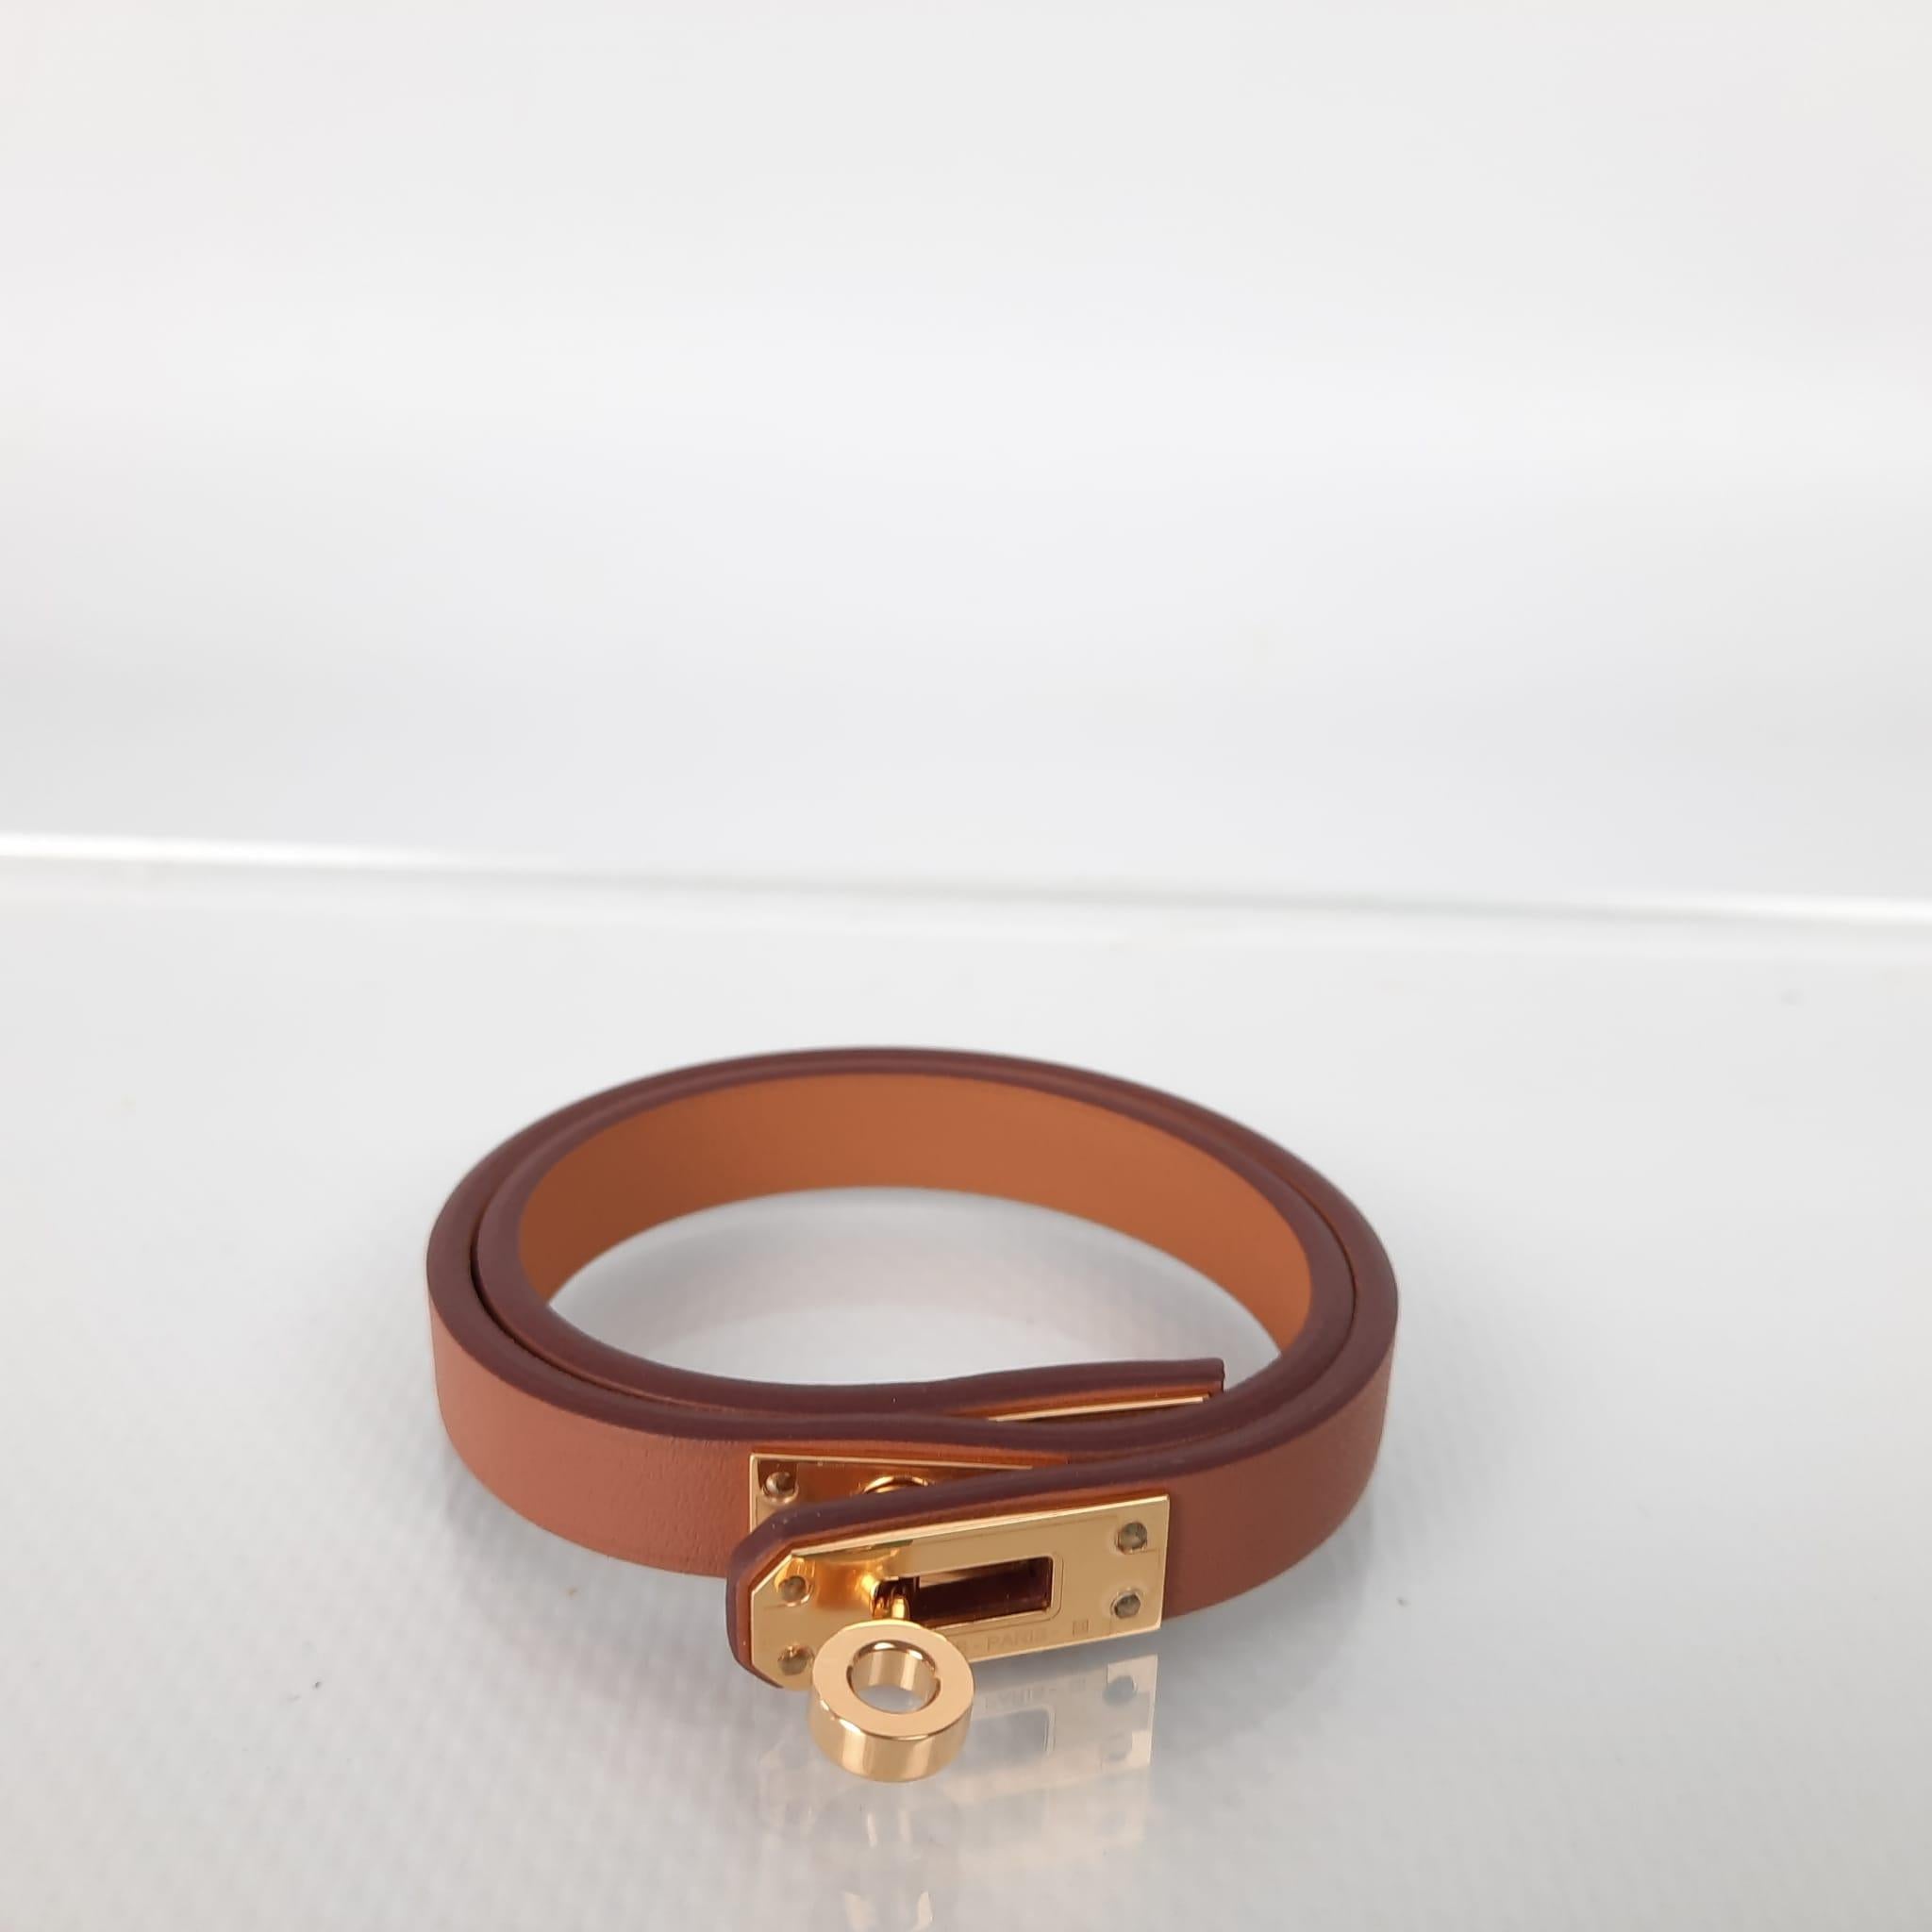 T2
Double tour bracelet in Swift calfskin with gold-plated mini Kelly closure.
Wrist size from 14.5 to 15.5 cm  Leather width: 1 cm